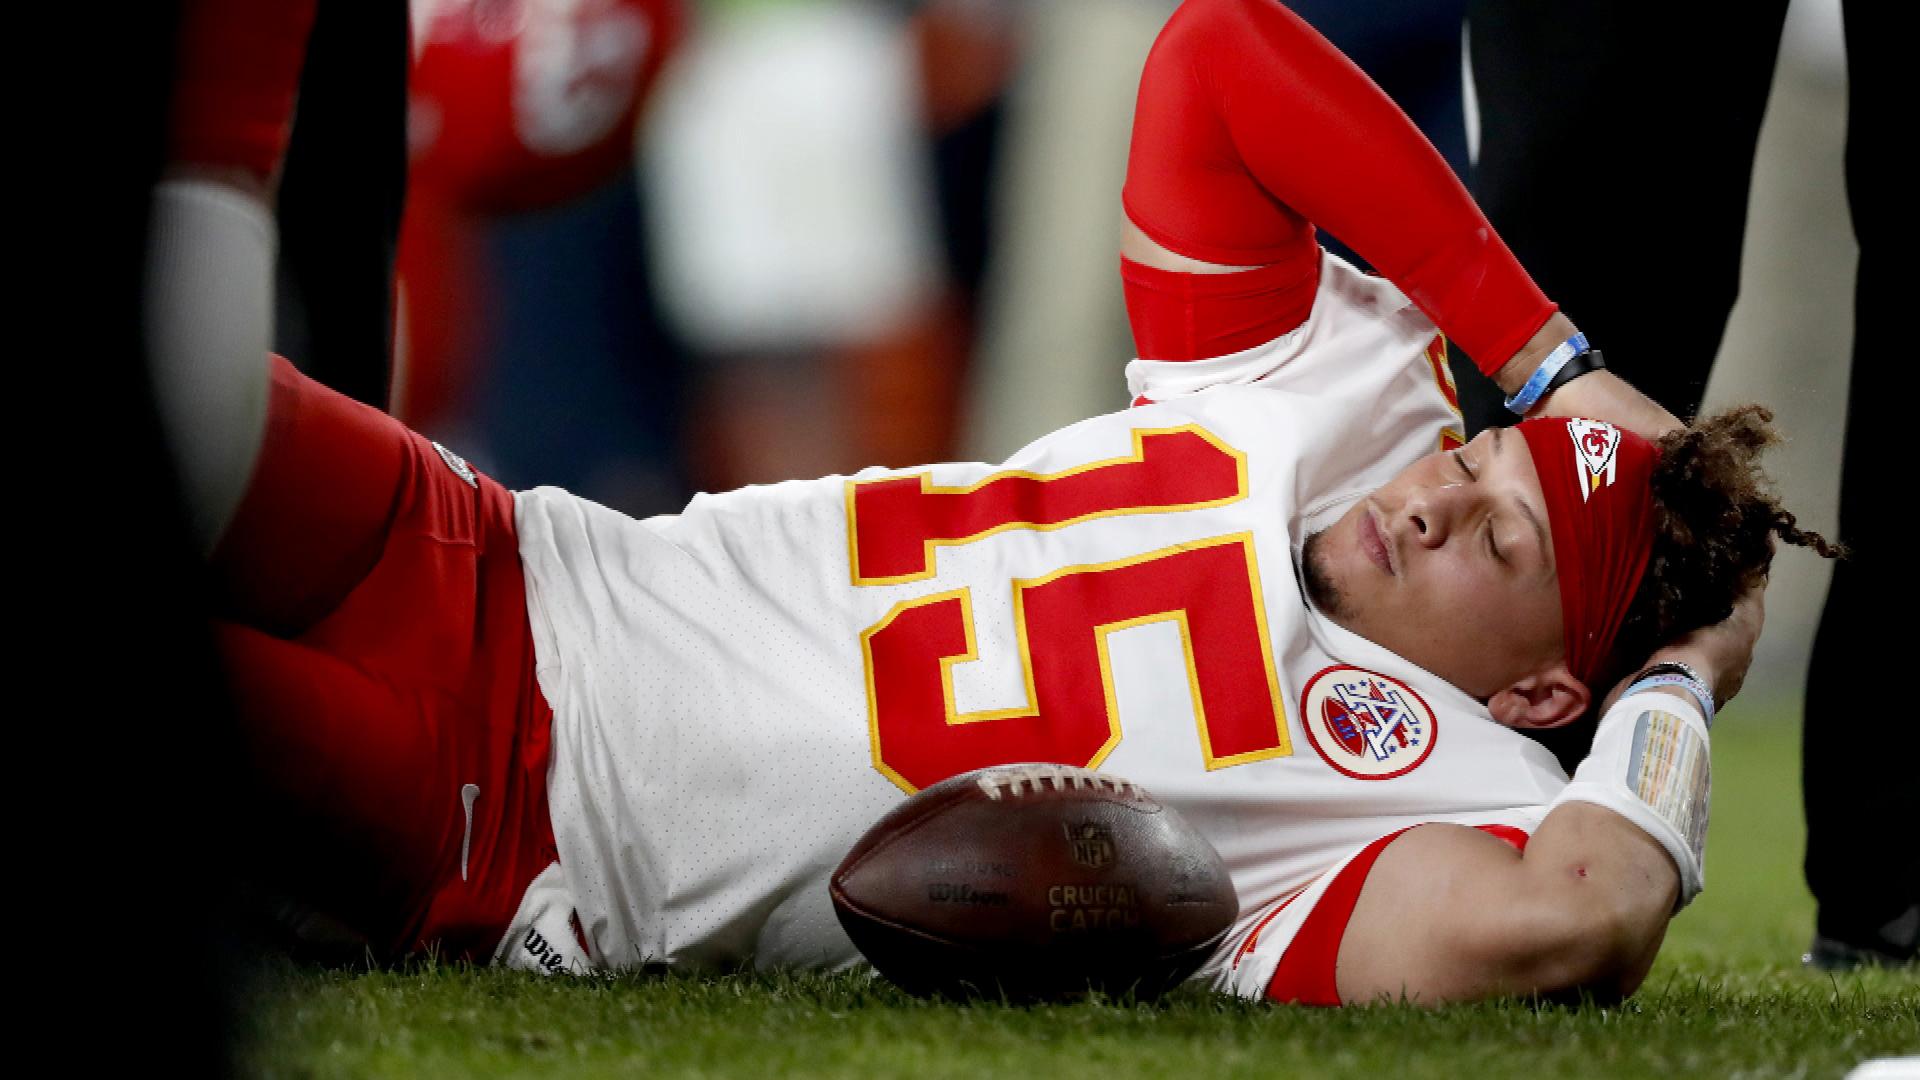 Flipboard: Why Patrick Mahomes' injury does not sink Chiefs' Hill and Kelce1920 x 1080